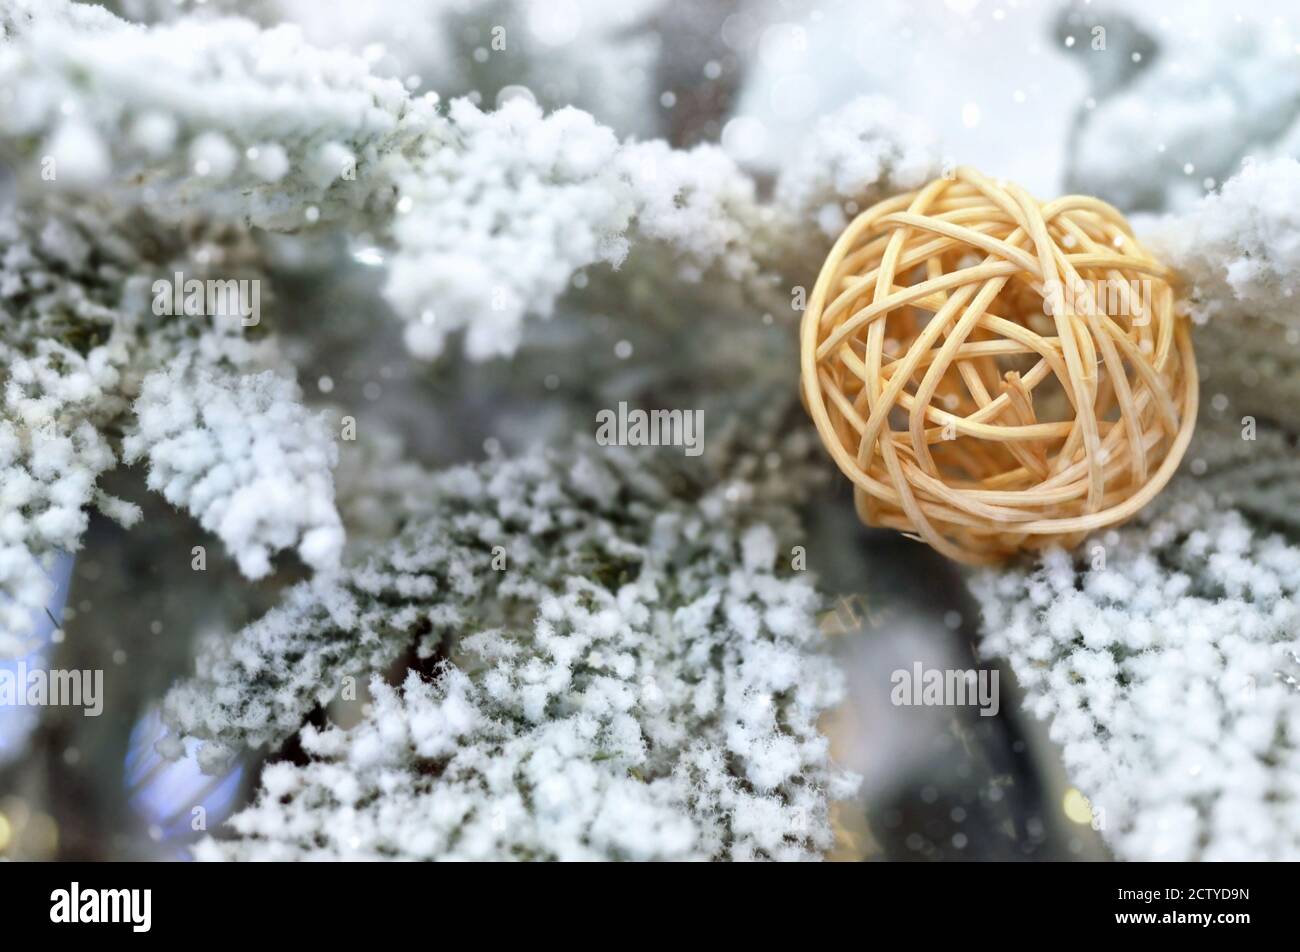 Wicker ball decoration on snow covered Christmas tree with copy space. Close-up, selective focus. Stock Photo